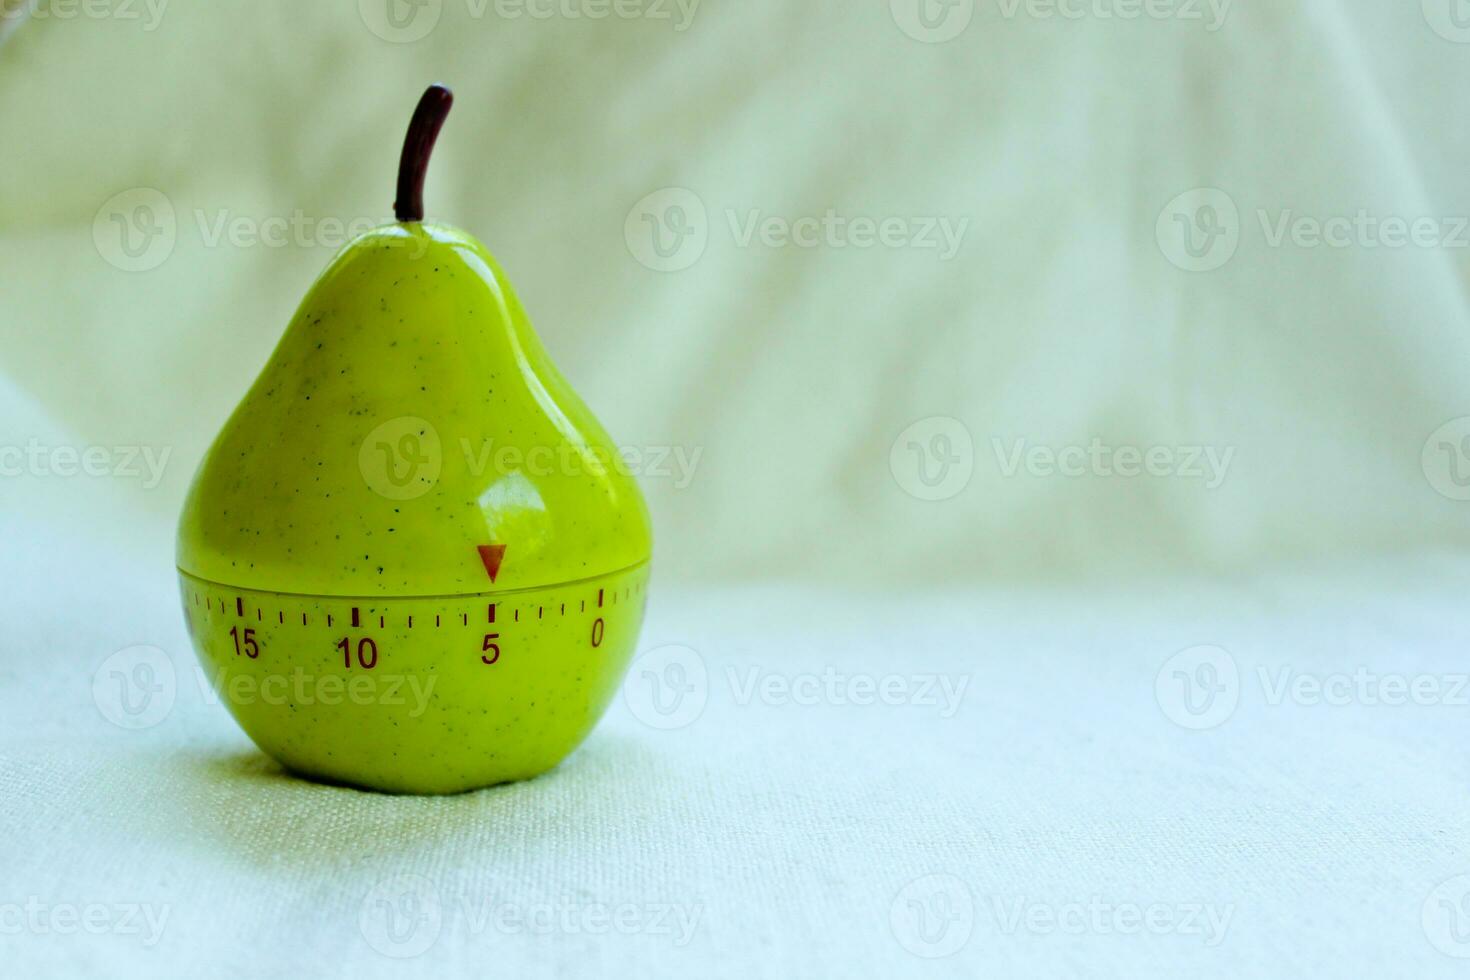 Kitchen egg timer in pear shape turned on 5 minutes isolated photo